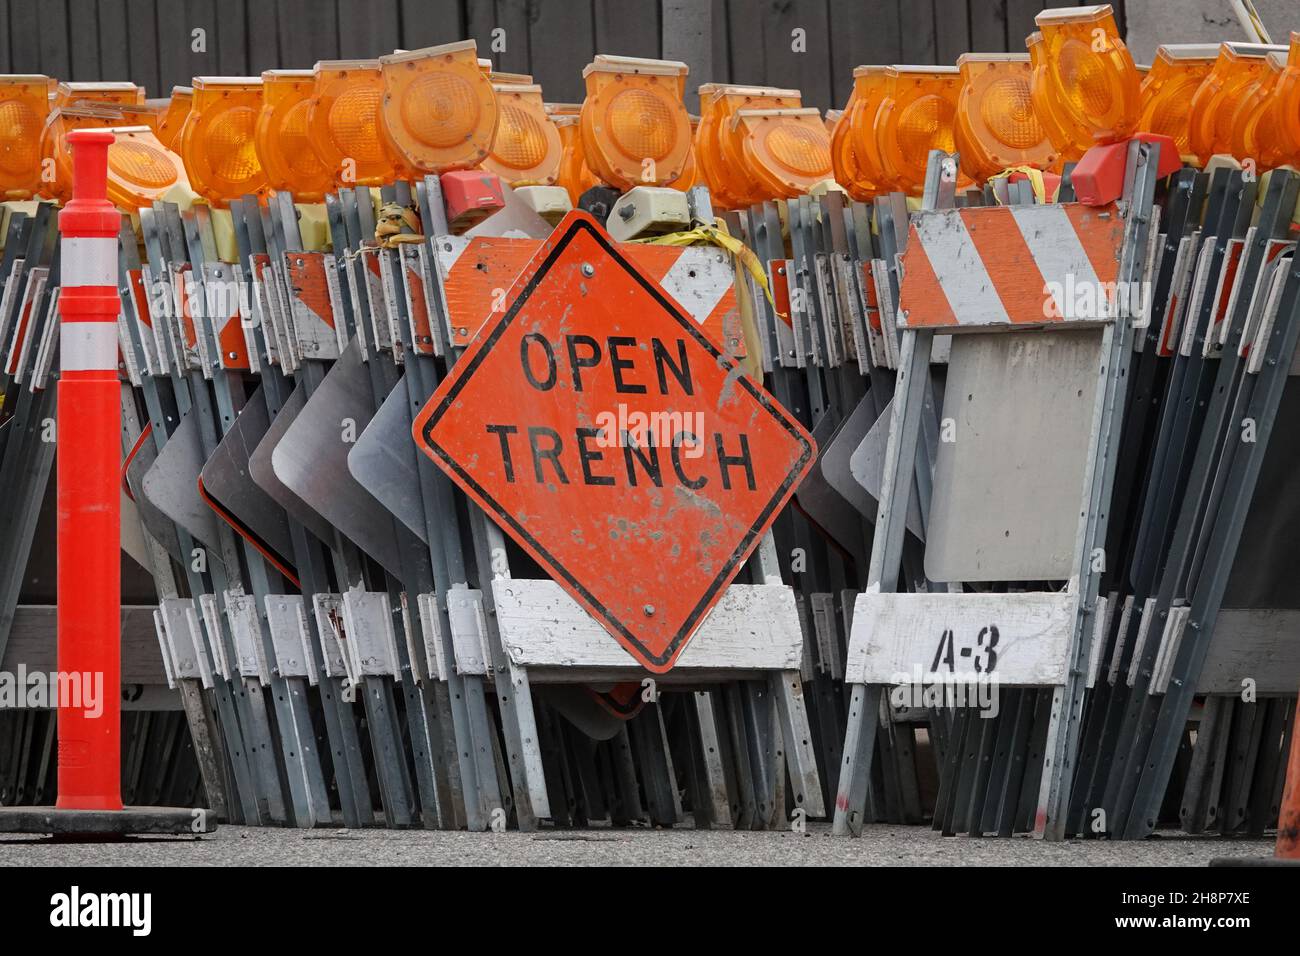 Orange and yellow traffic control barricades, topped with flashing lights, are shown with an OPEN TRENCH sign and a delineator pylon cone. Stock Photo